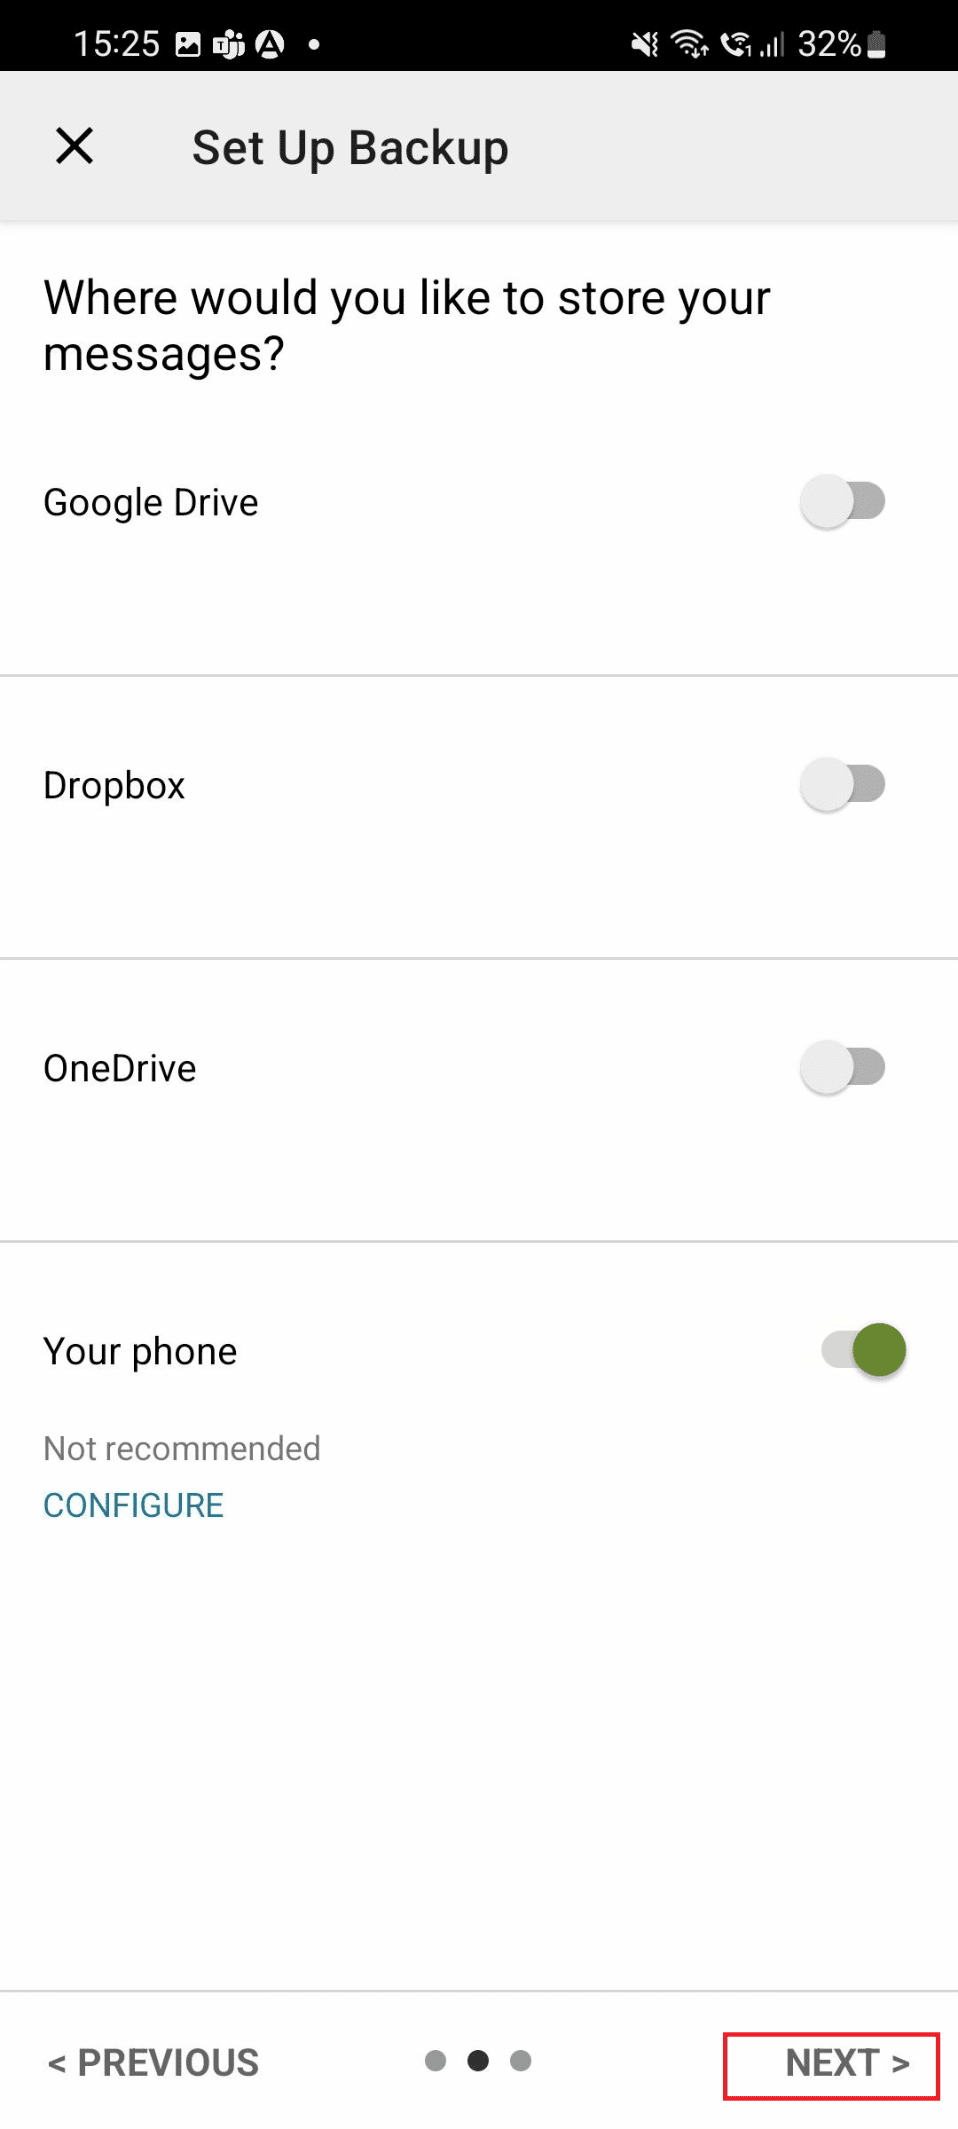 decide where you would like to store your messages and tap on the NEXT option